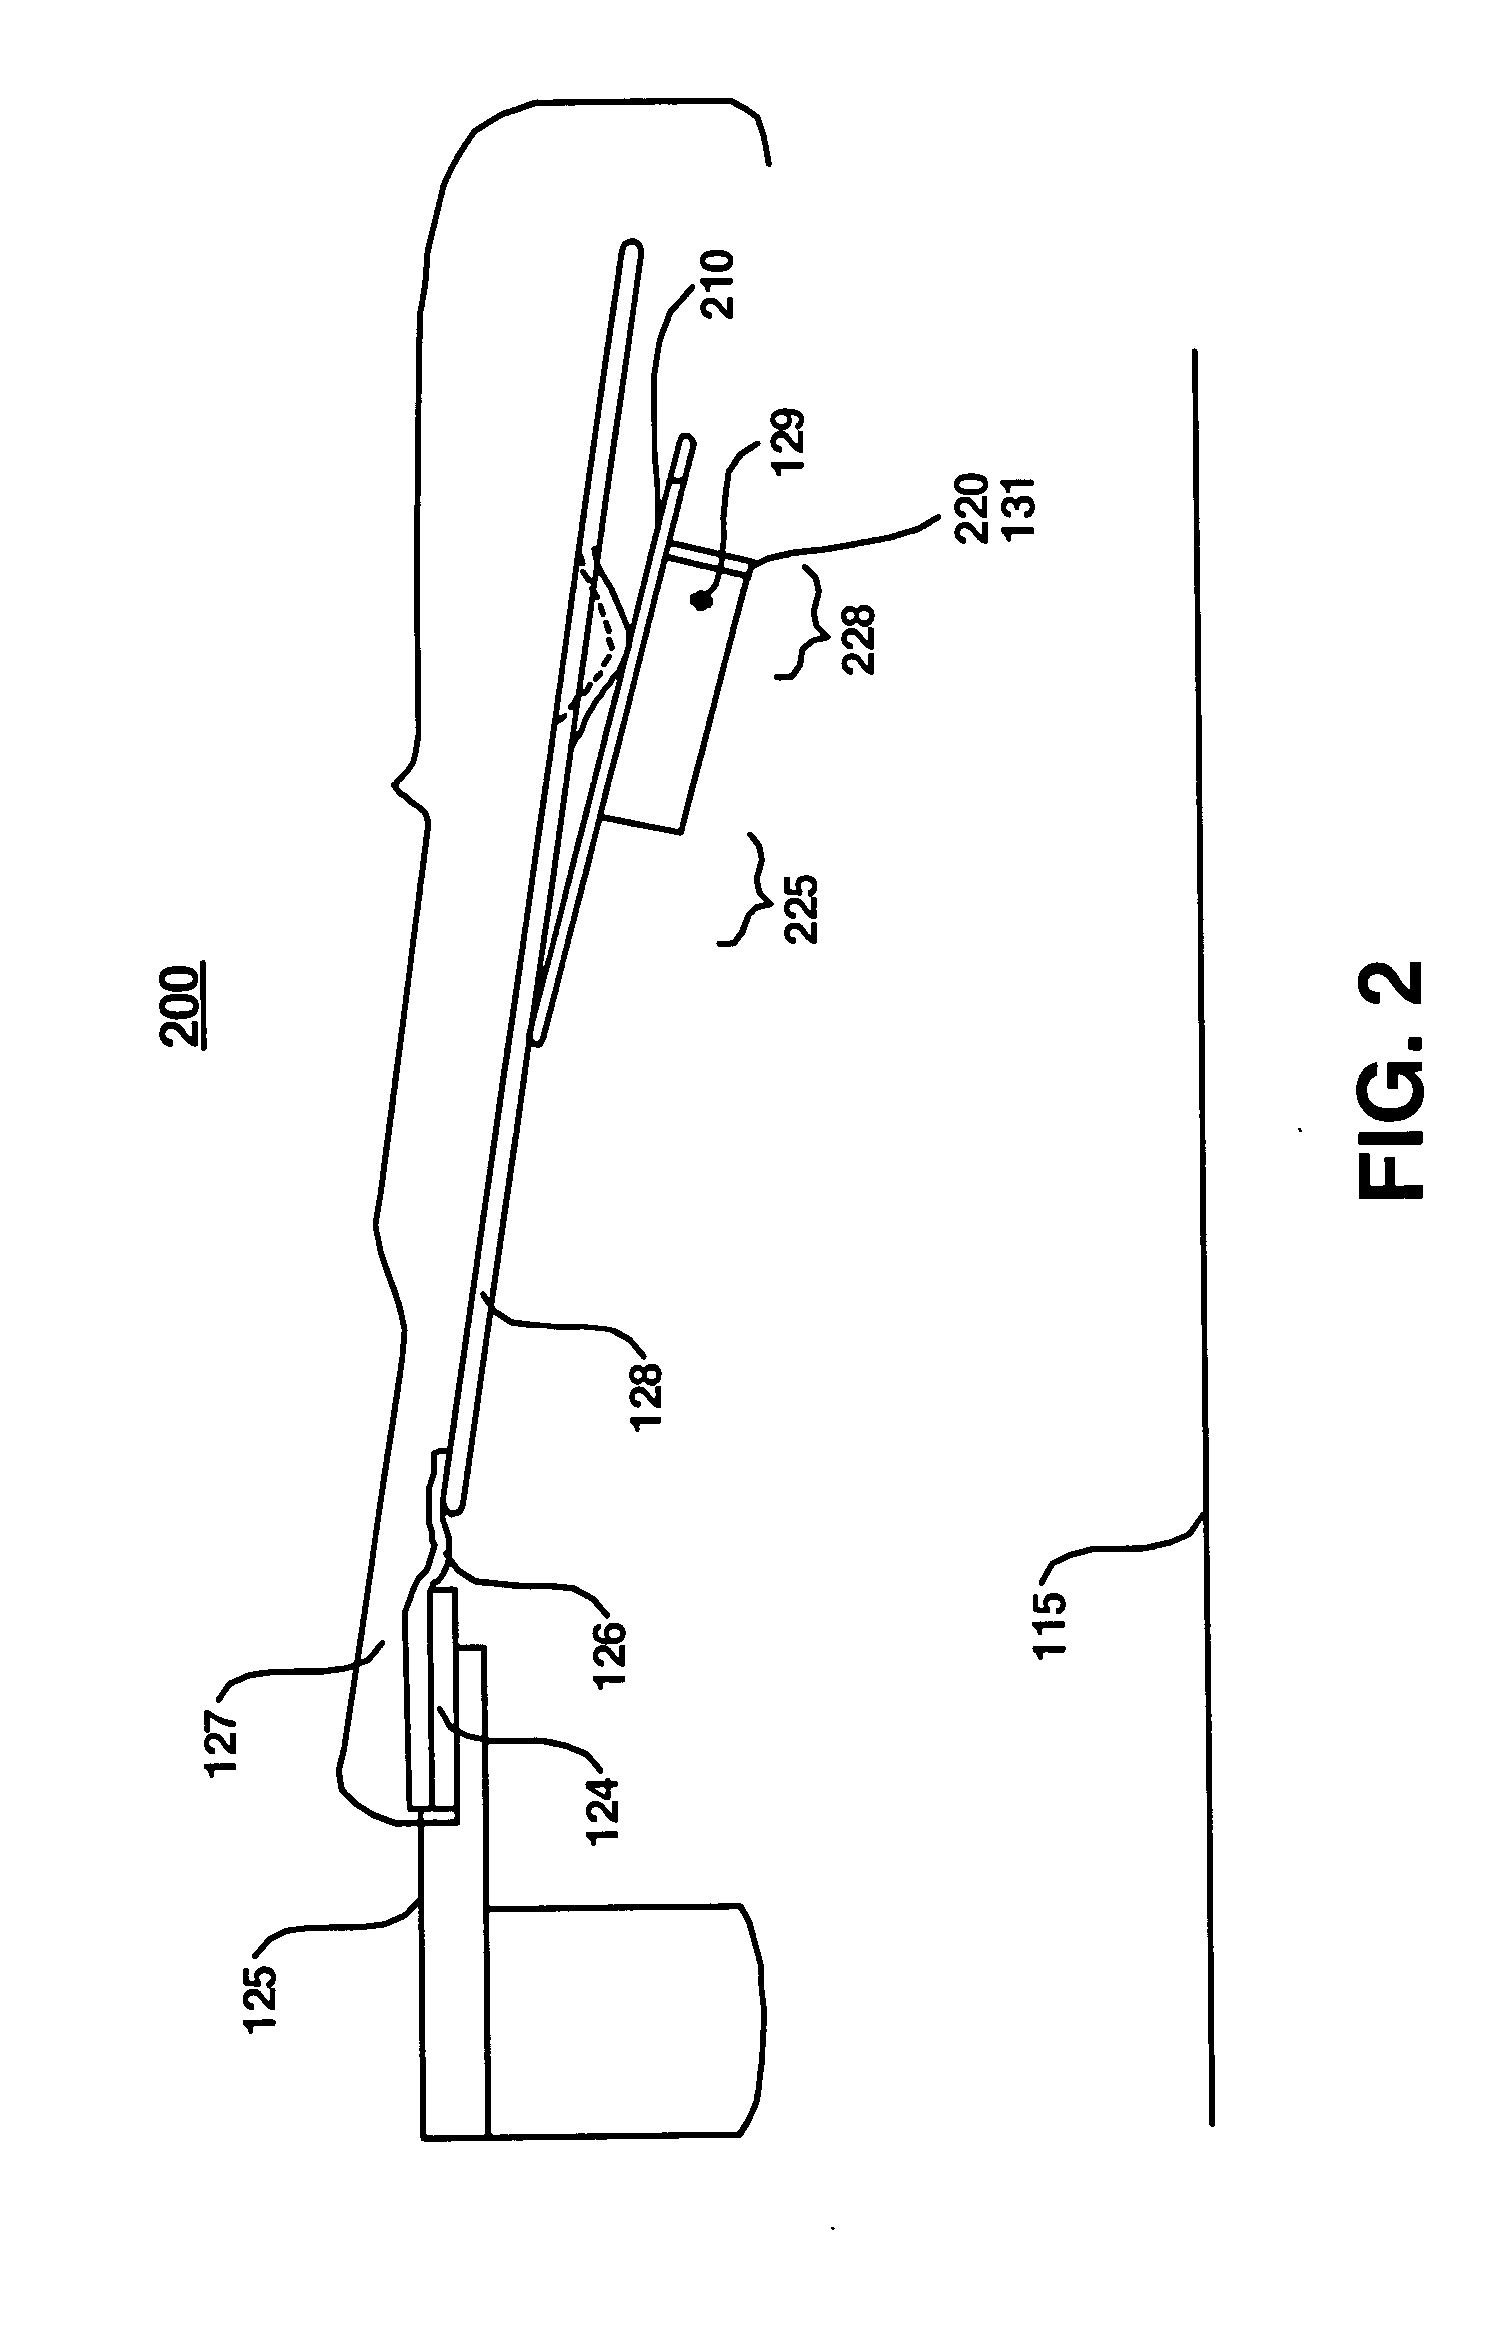 Method for utilizing a stainless steel framework for changing the resonance frequency range of a flexure nose portion of a head gimbal assembly